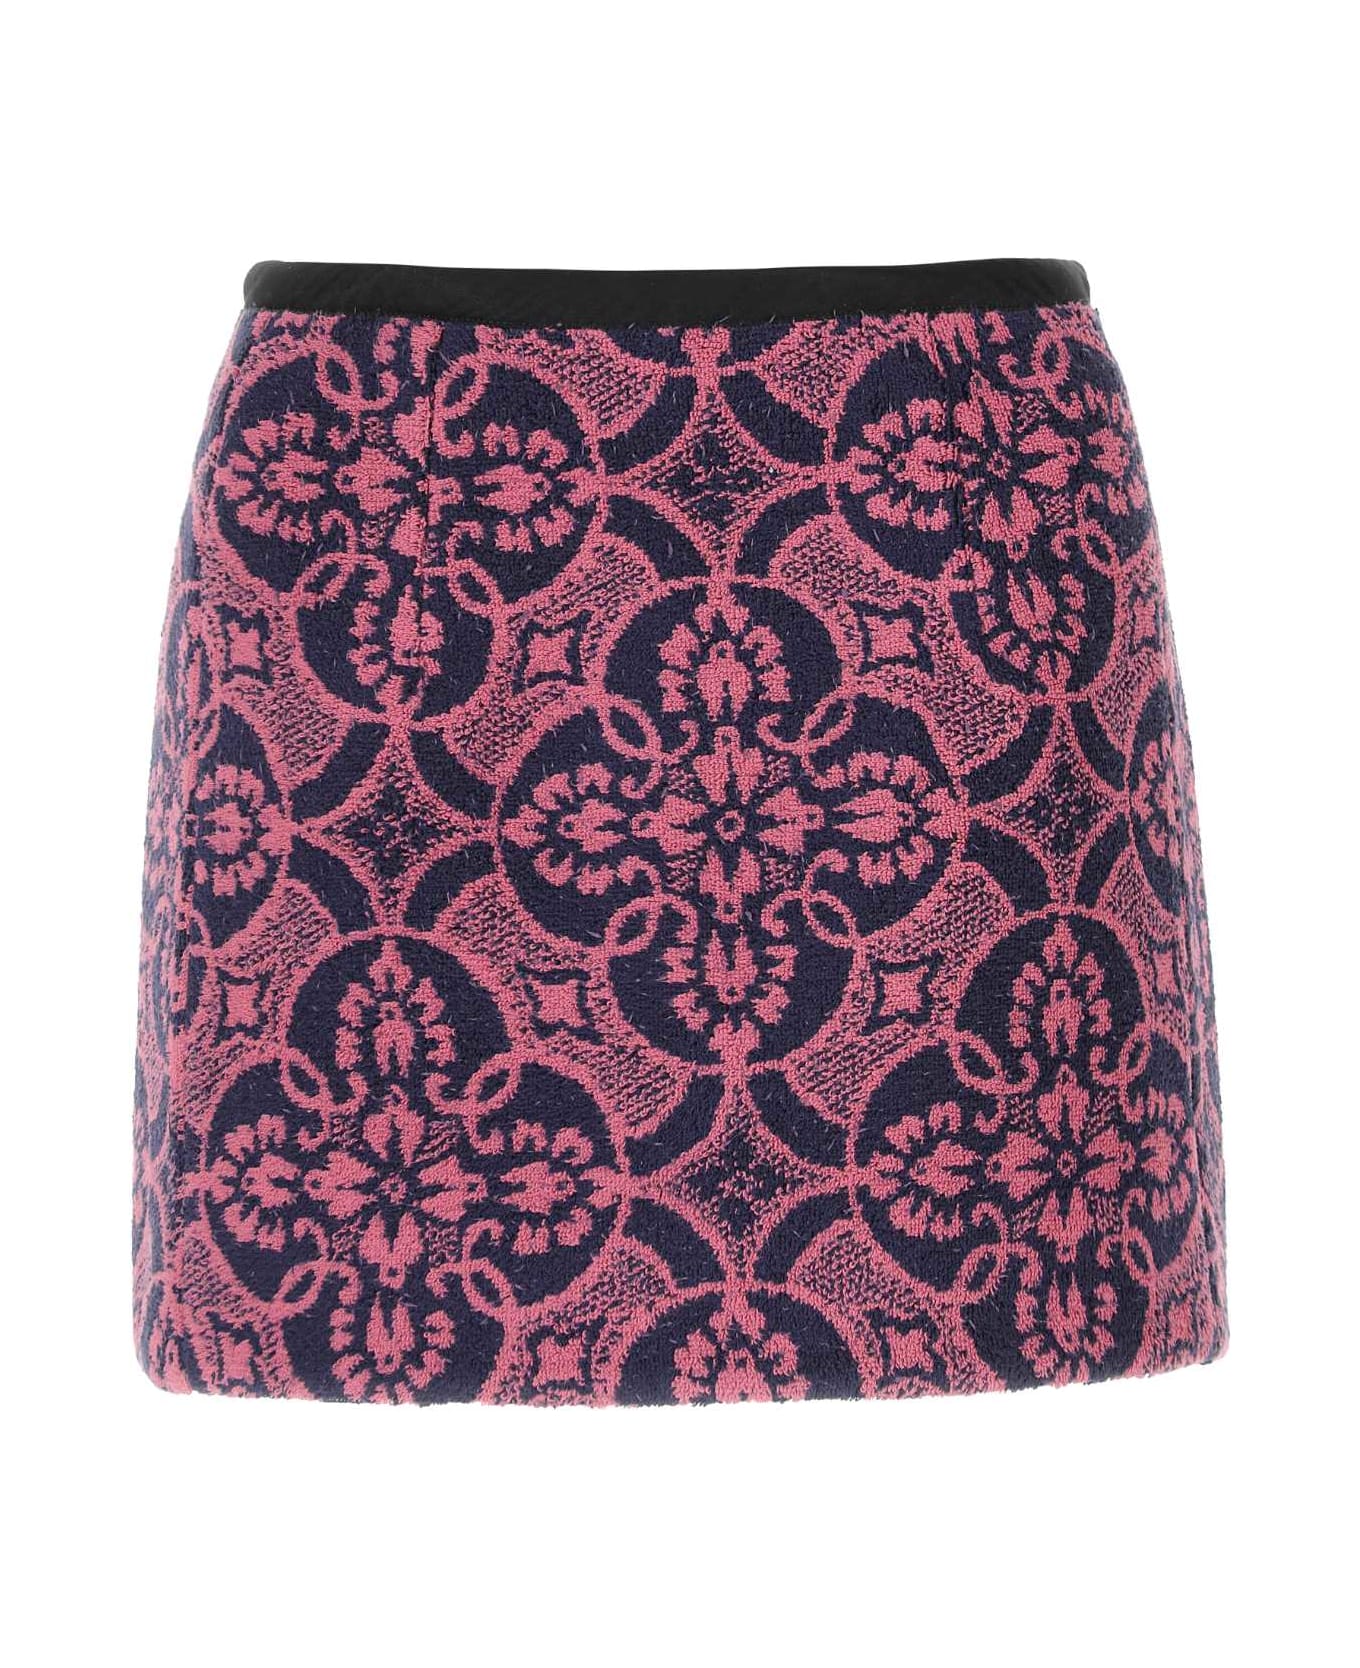 Marine Serre Embroidered Cotton And Polyester Mini Skirt - Multicolor